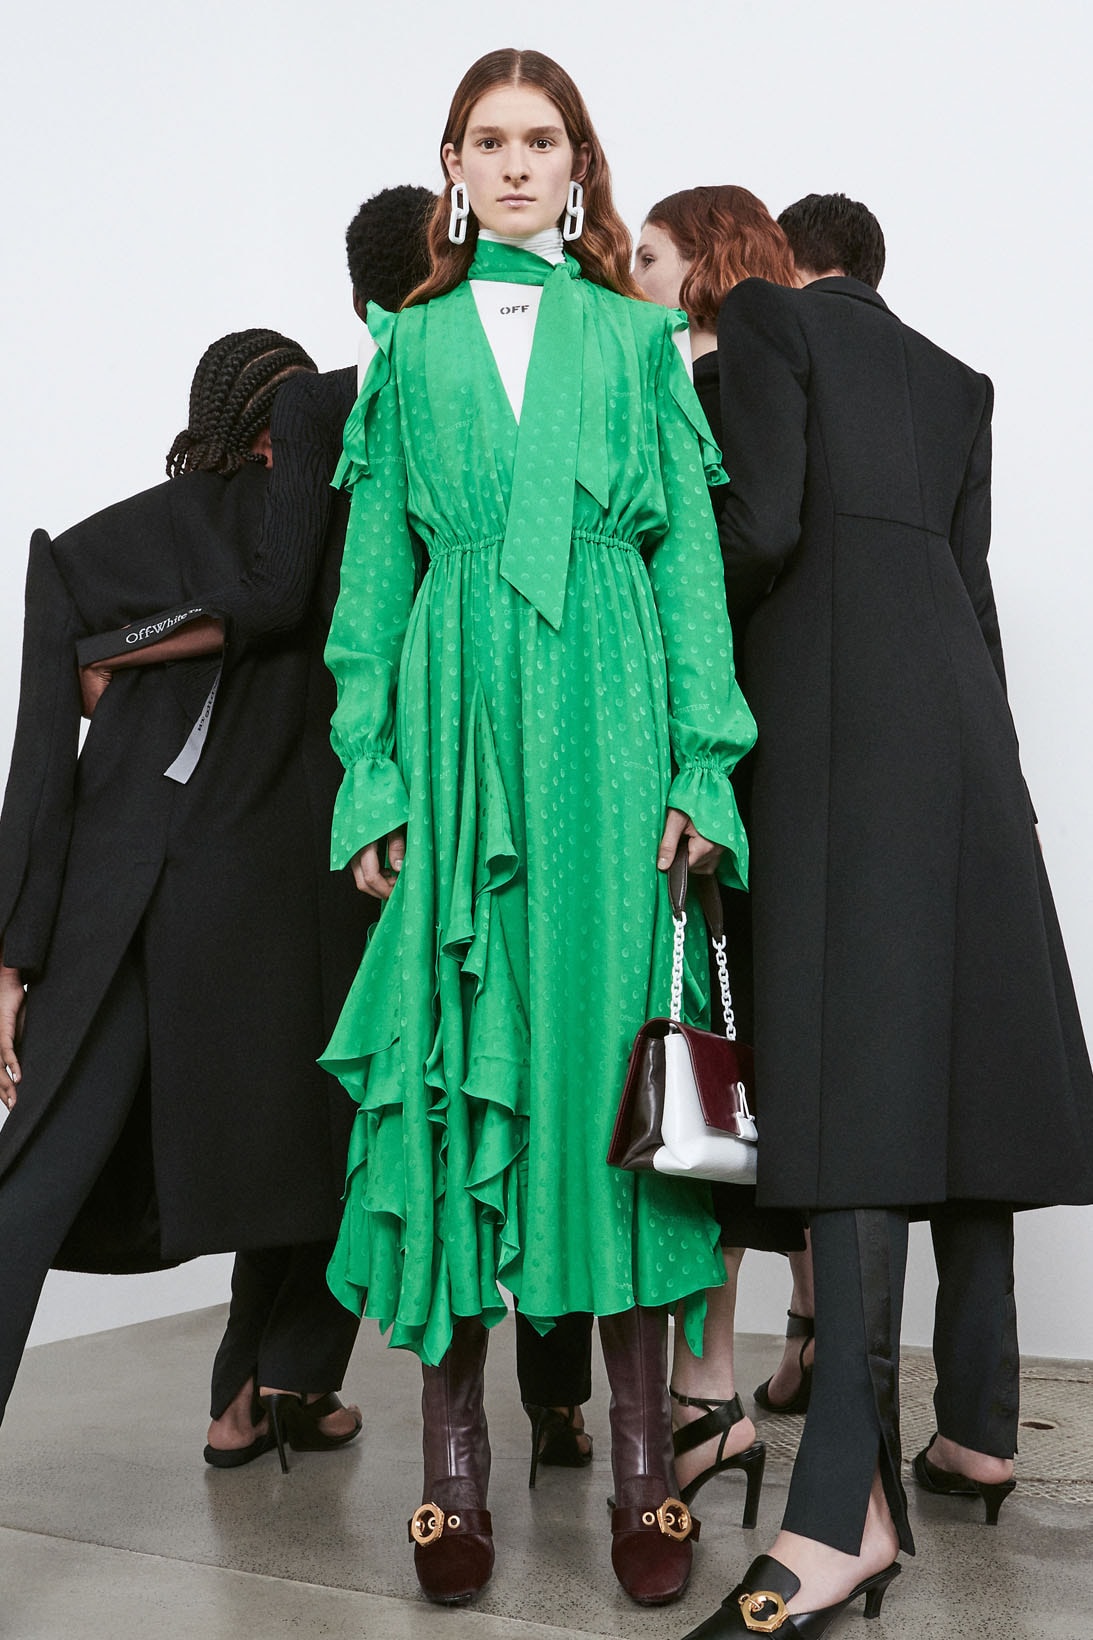 off-white virgil abloh pre-fall collection womenswear jackets suits coats 